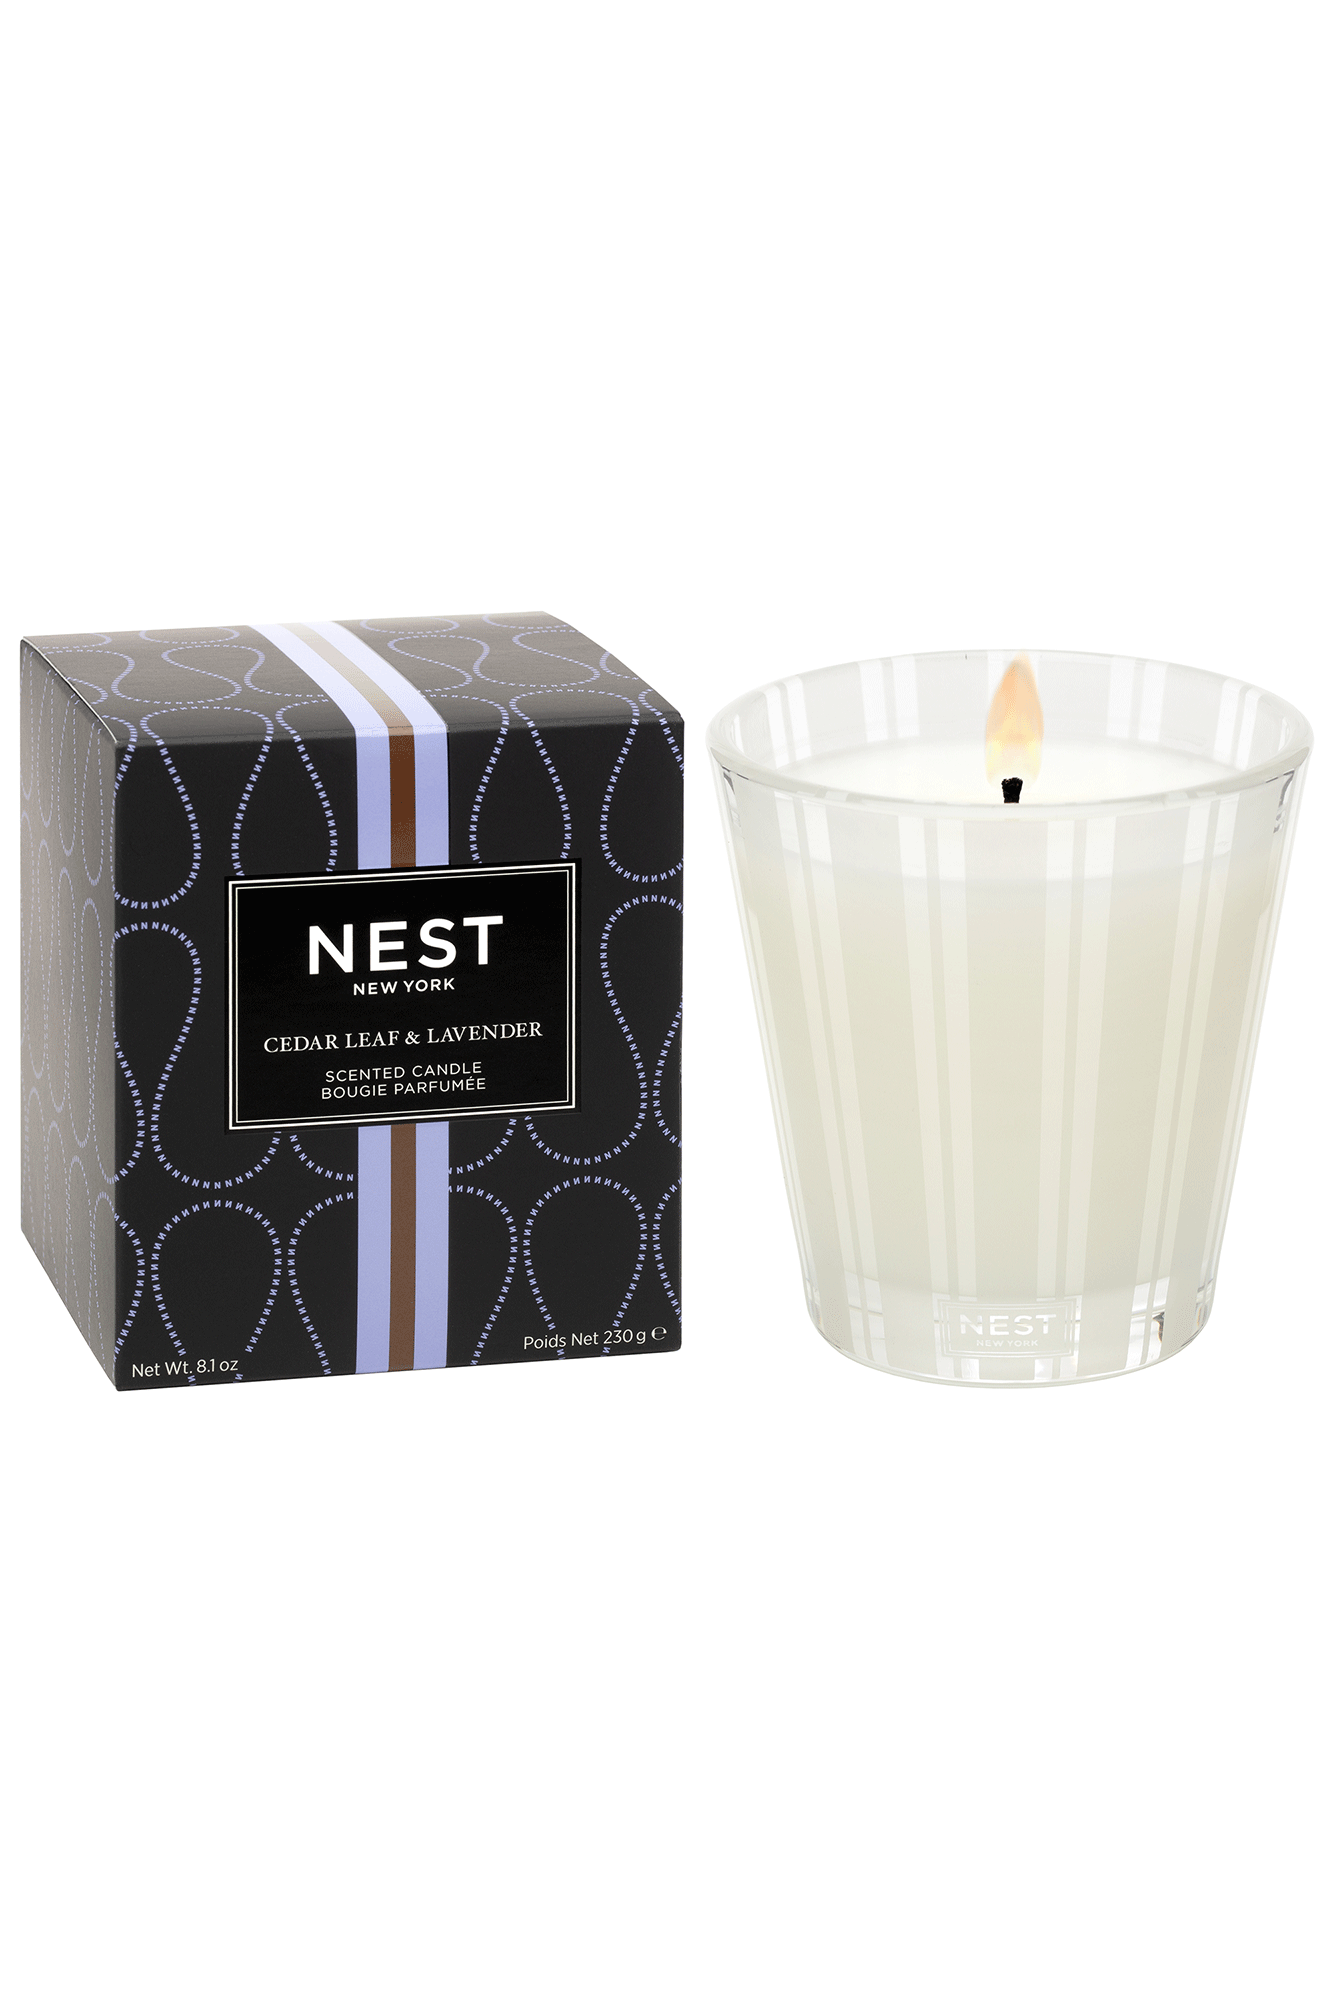 Create a calming, spa-like atmosphere with this Classic Candle from Nest. Featuring a blend of rosemary, lavender, and sage with cedar leaves, it provides an herbaceous scent to any room. Enhance your ambiance with this long-lasting candle.